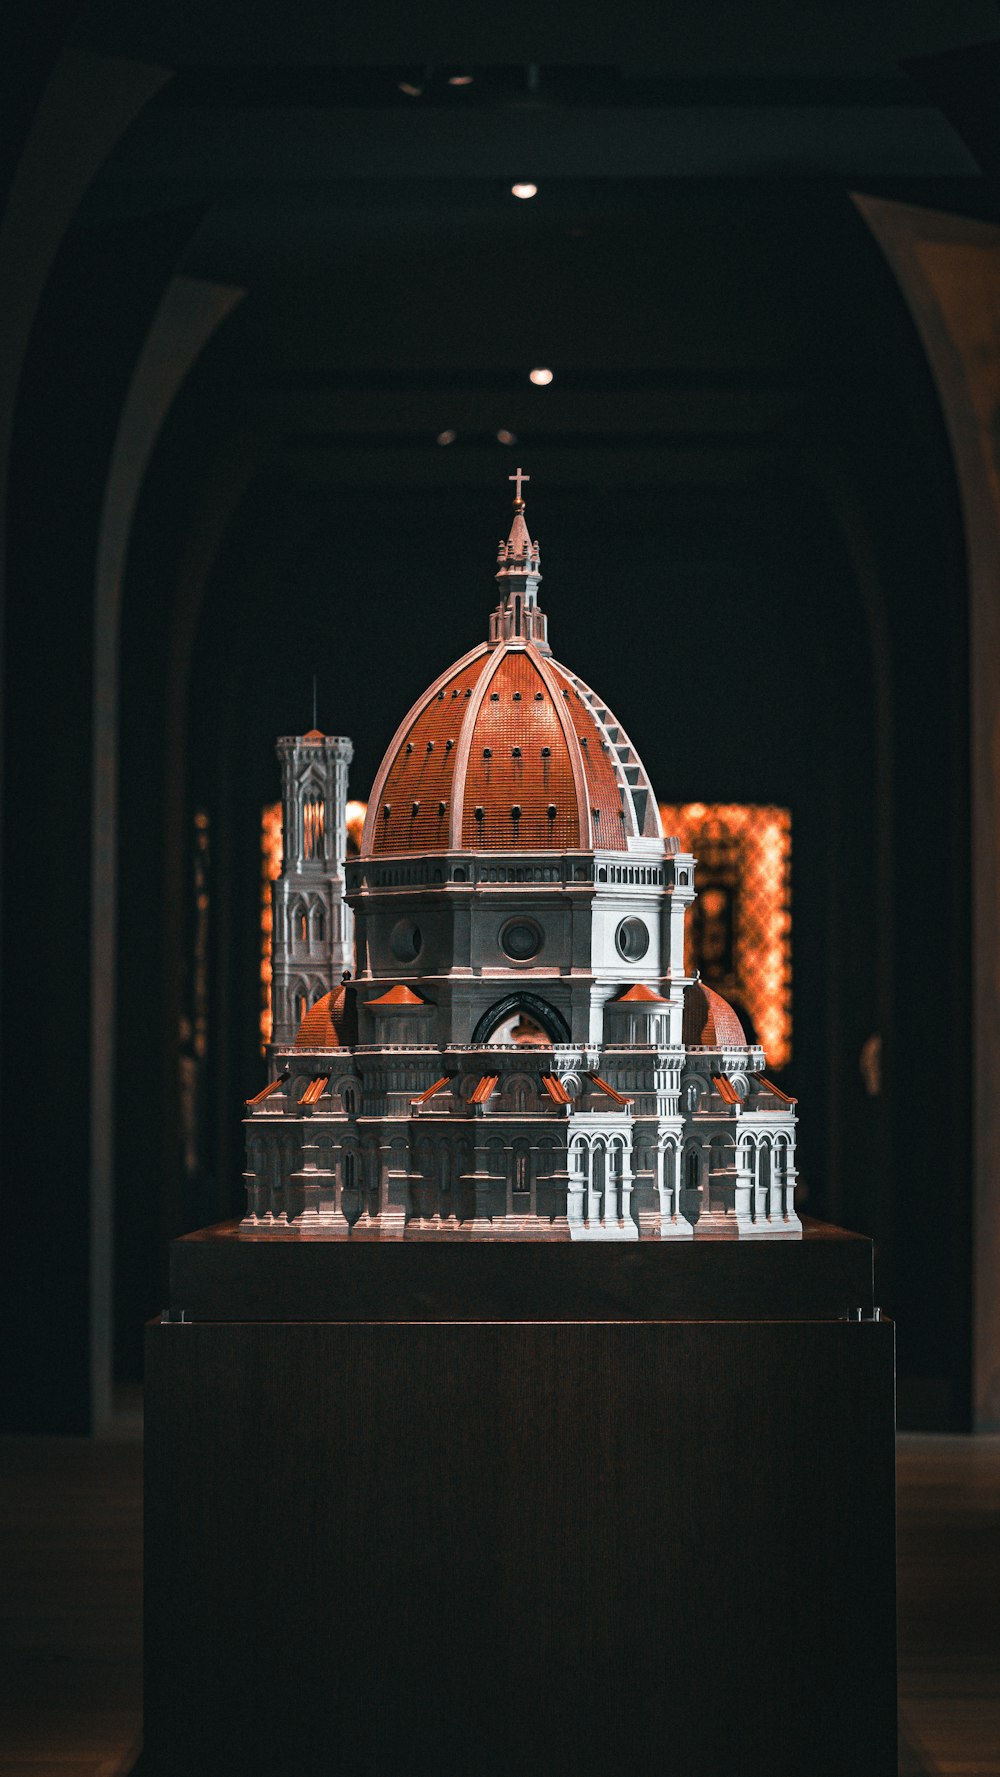 a model of the dome of a building